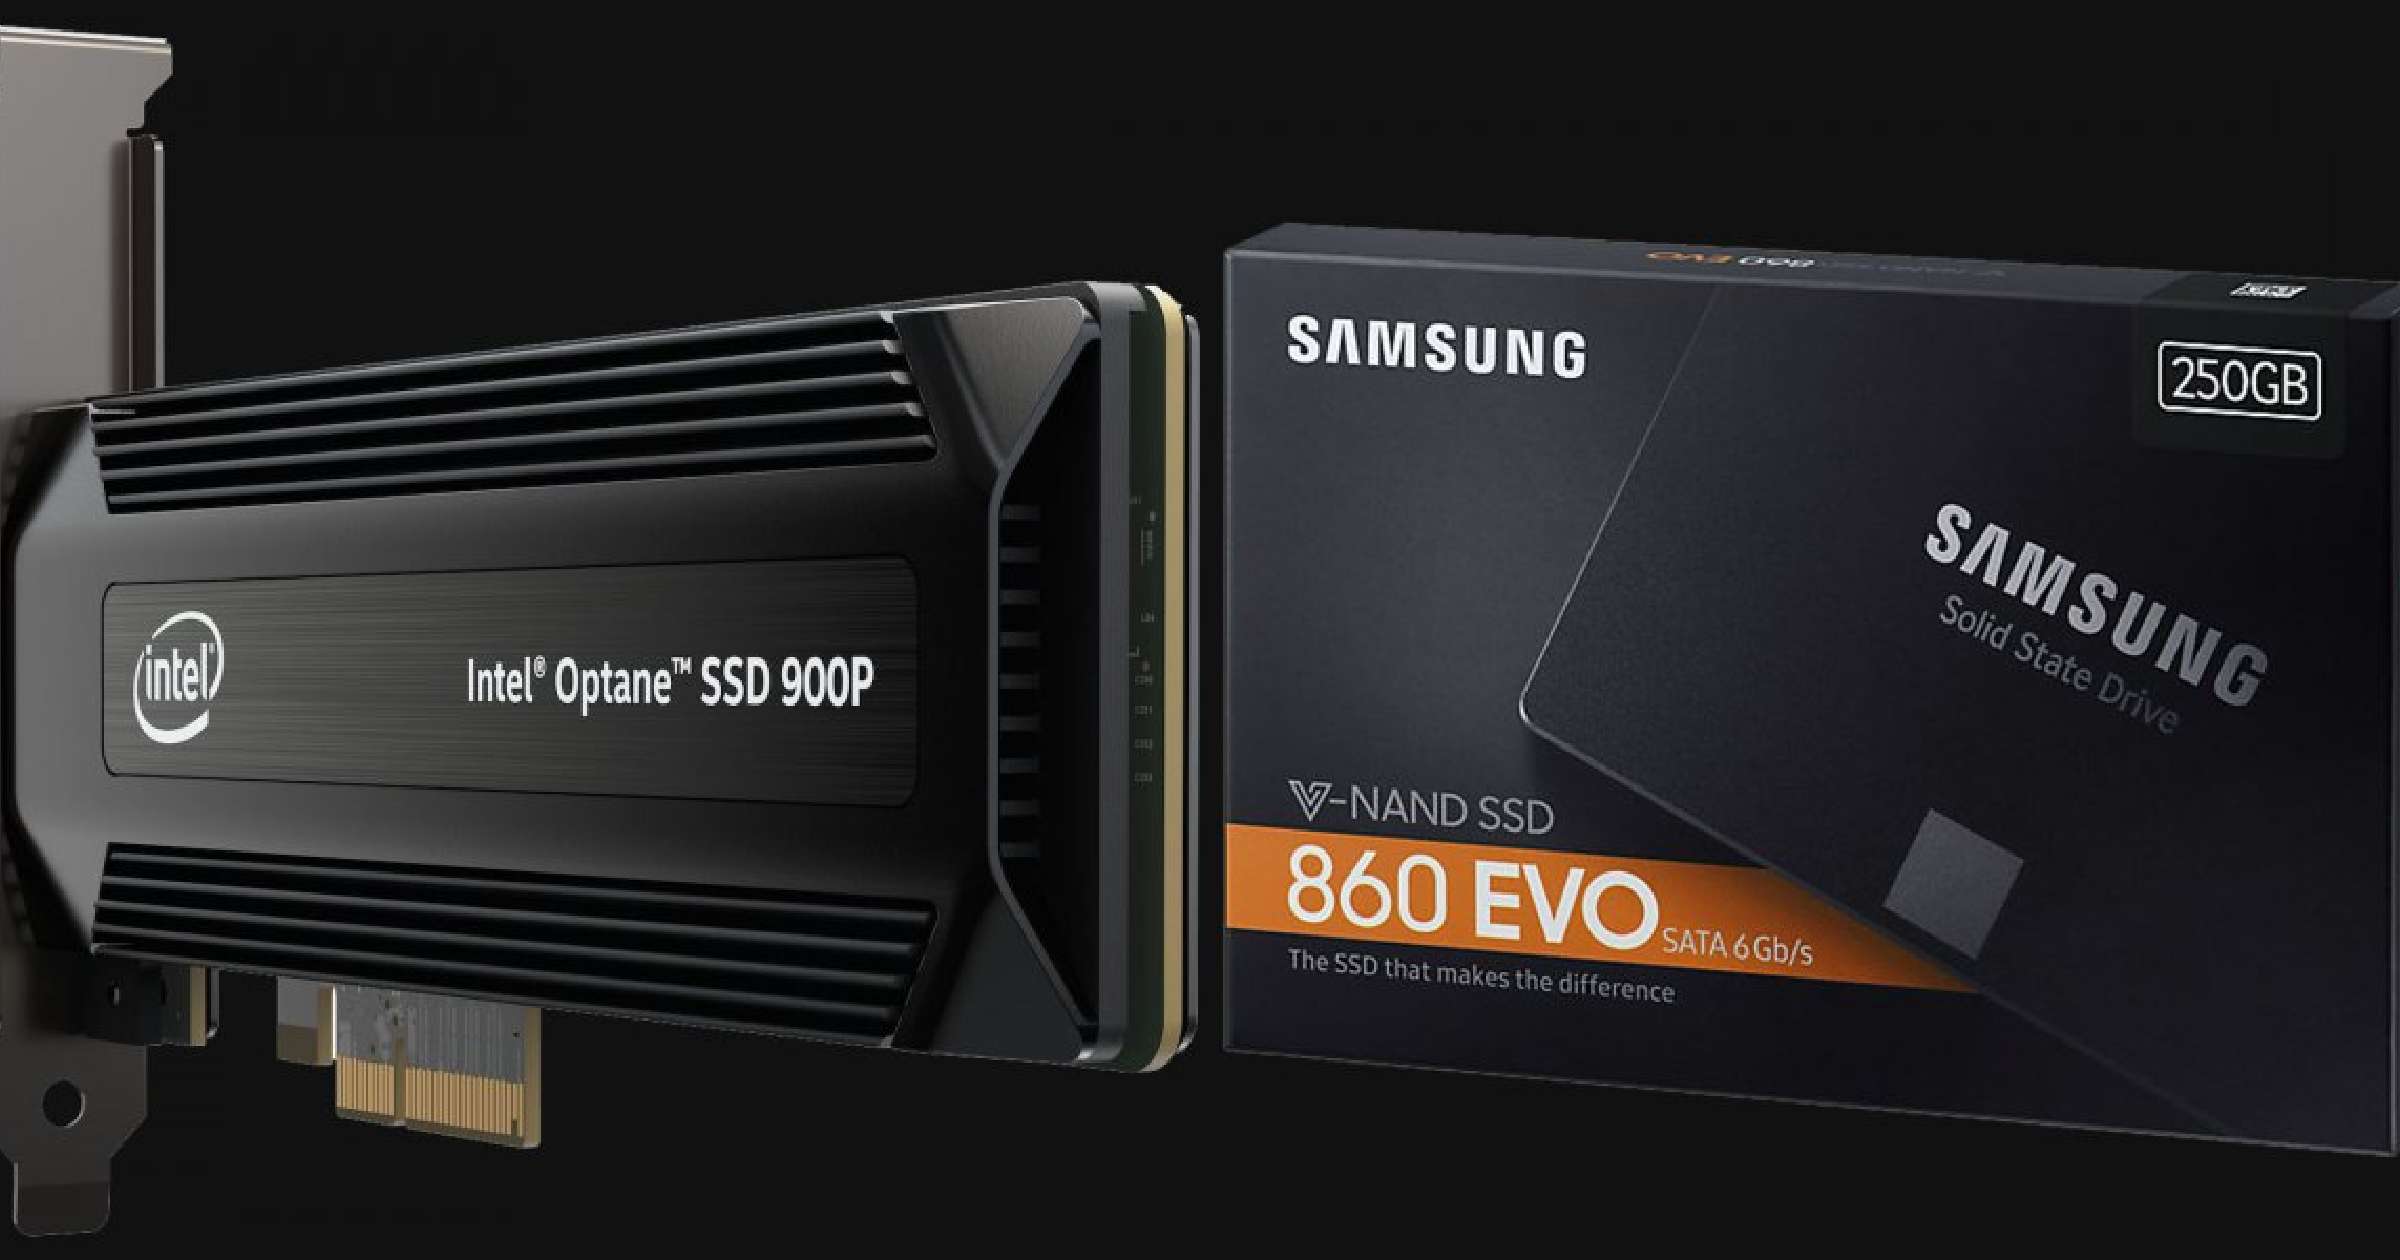 How Many Games Will 256GB SSD Hold?